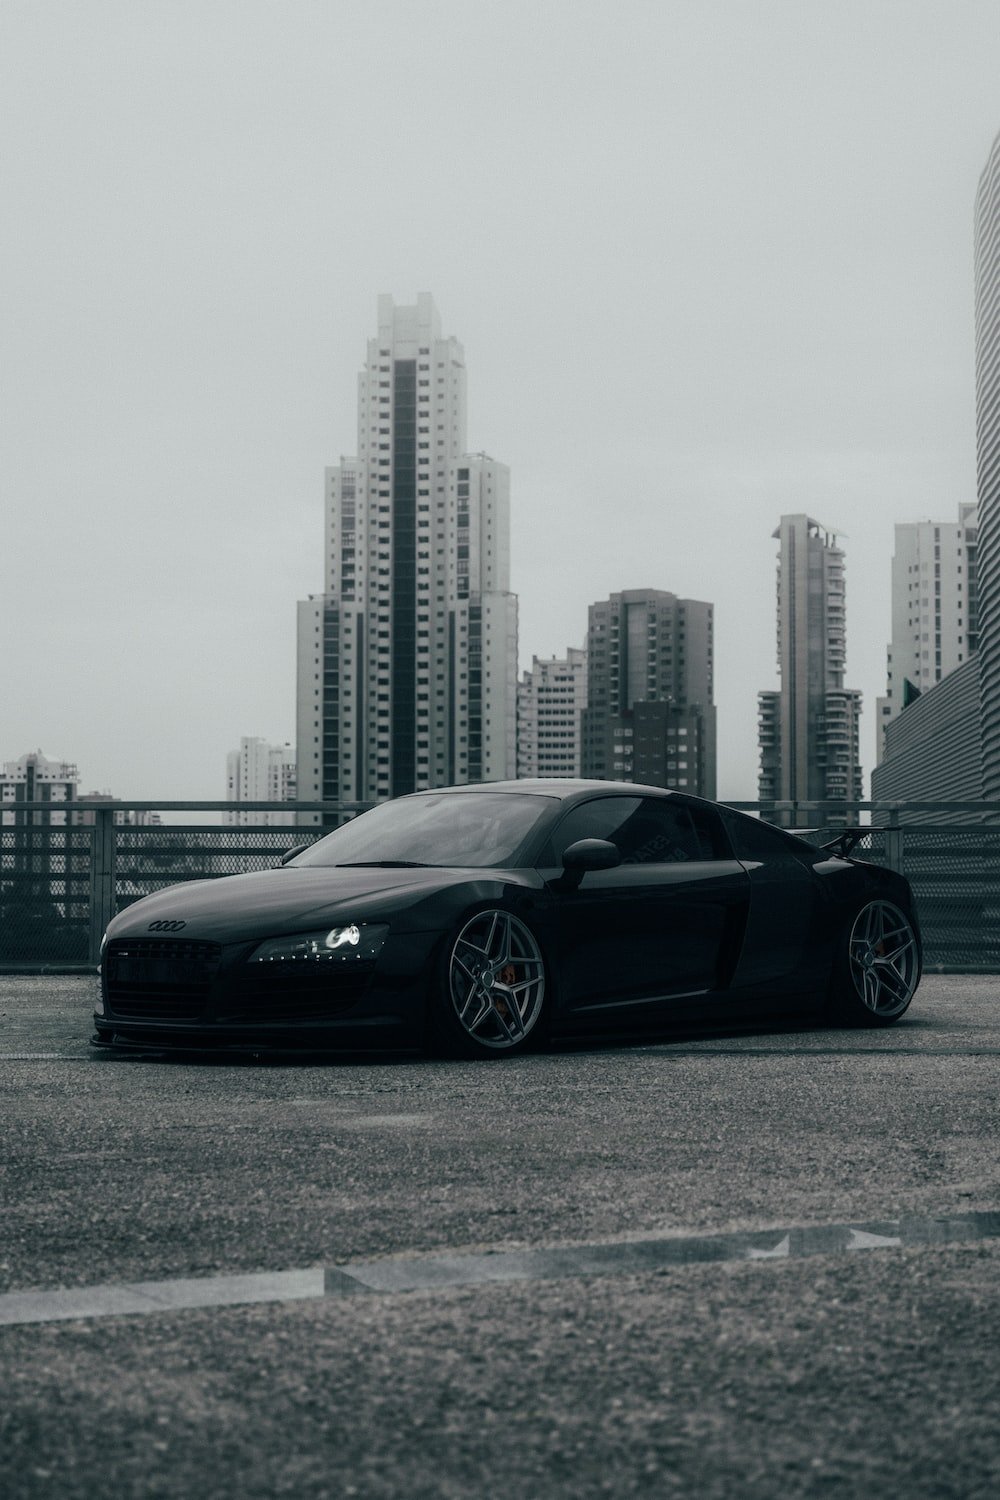 Audi R8 Picture. Download Free Image